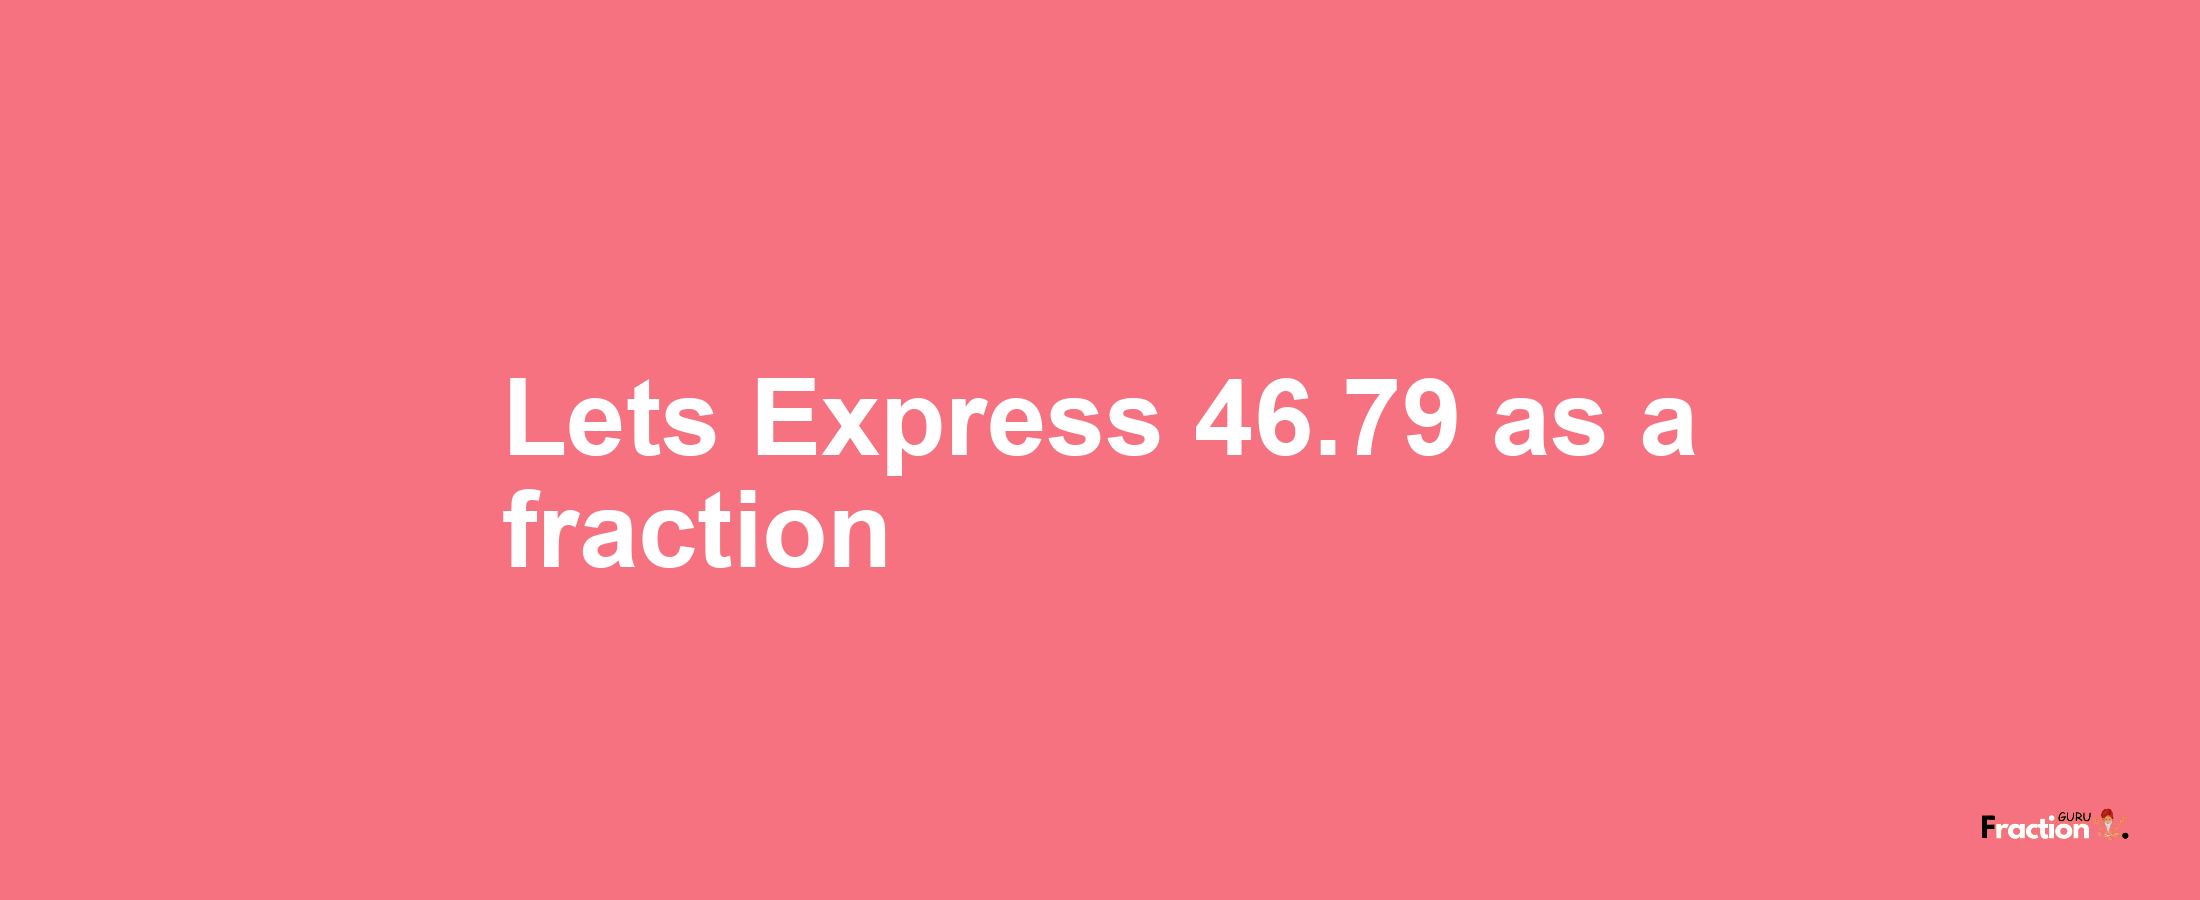 Lets Express 46.79 as afraction